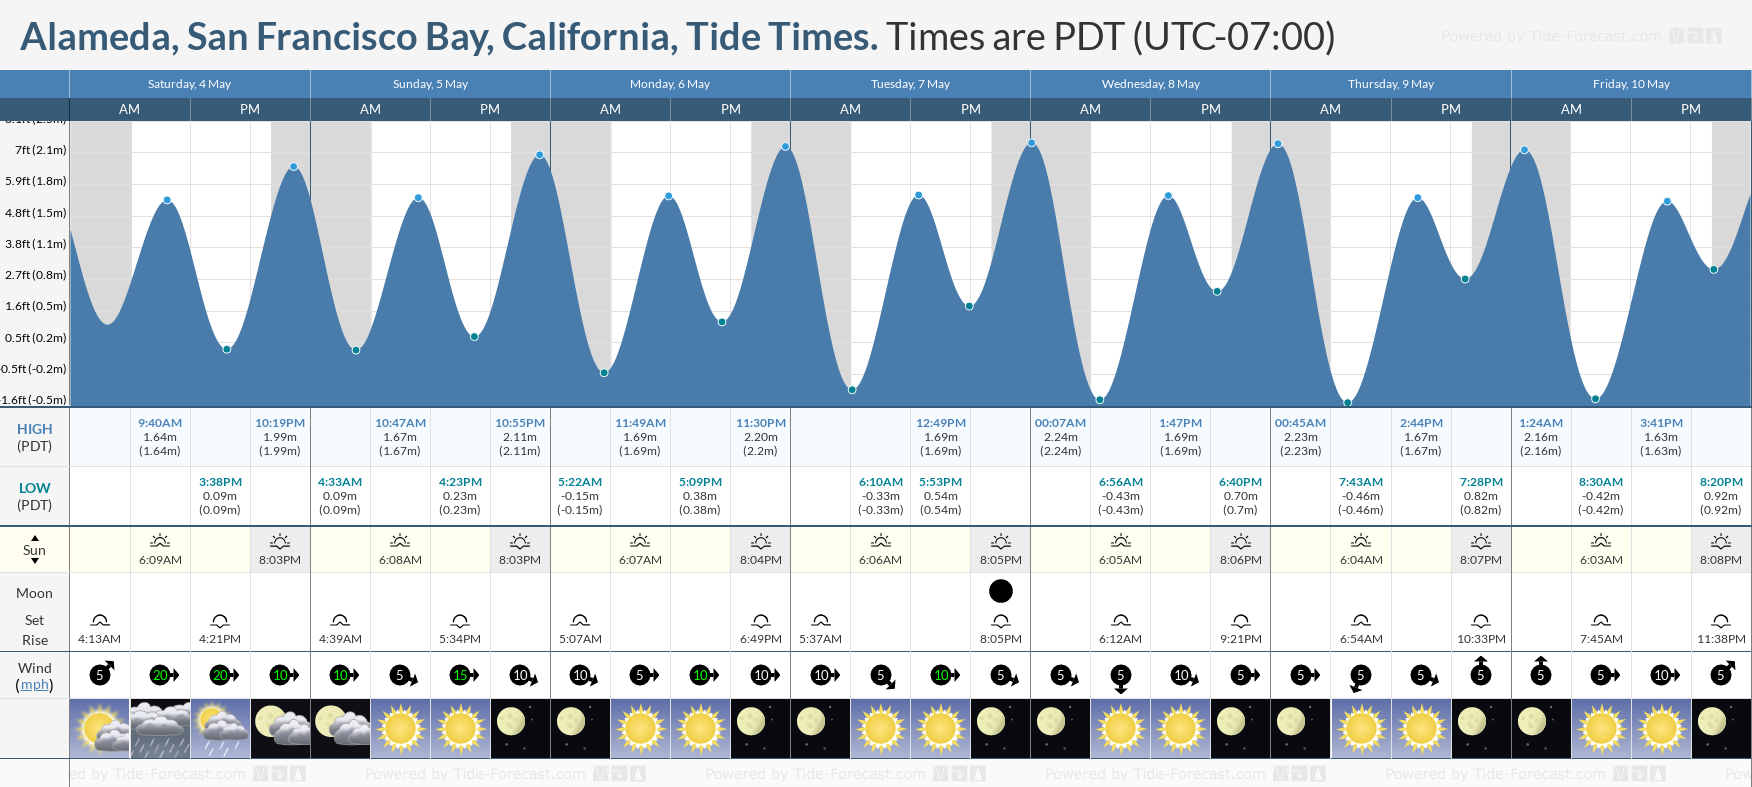 Alameda, San Francisco Bay, California Tide Chart including high and low tide tide times for the next 7 days